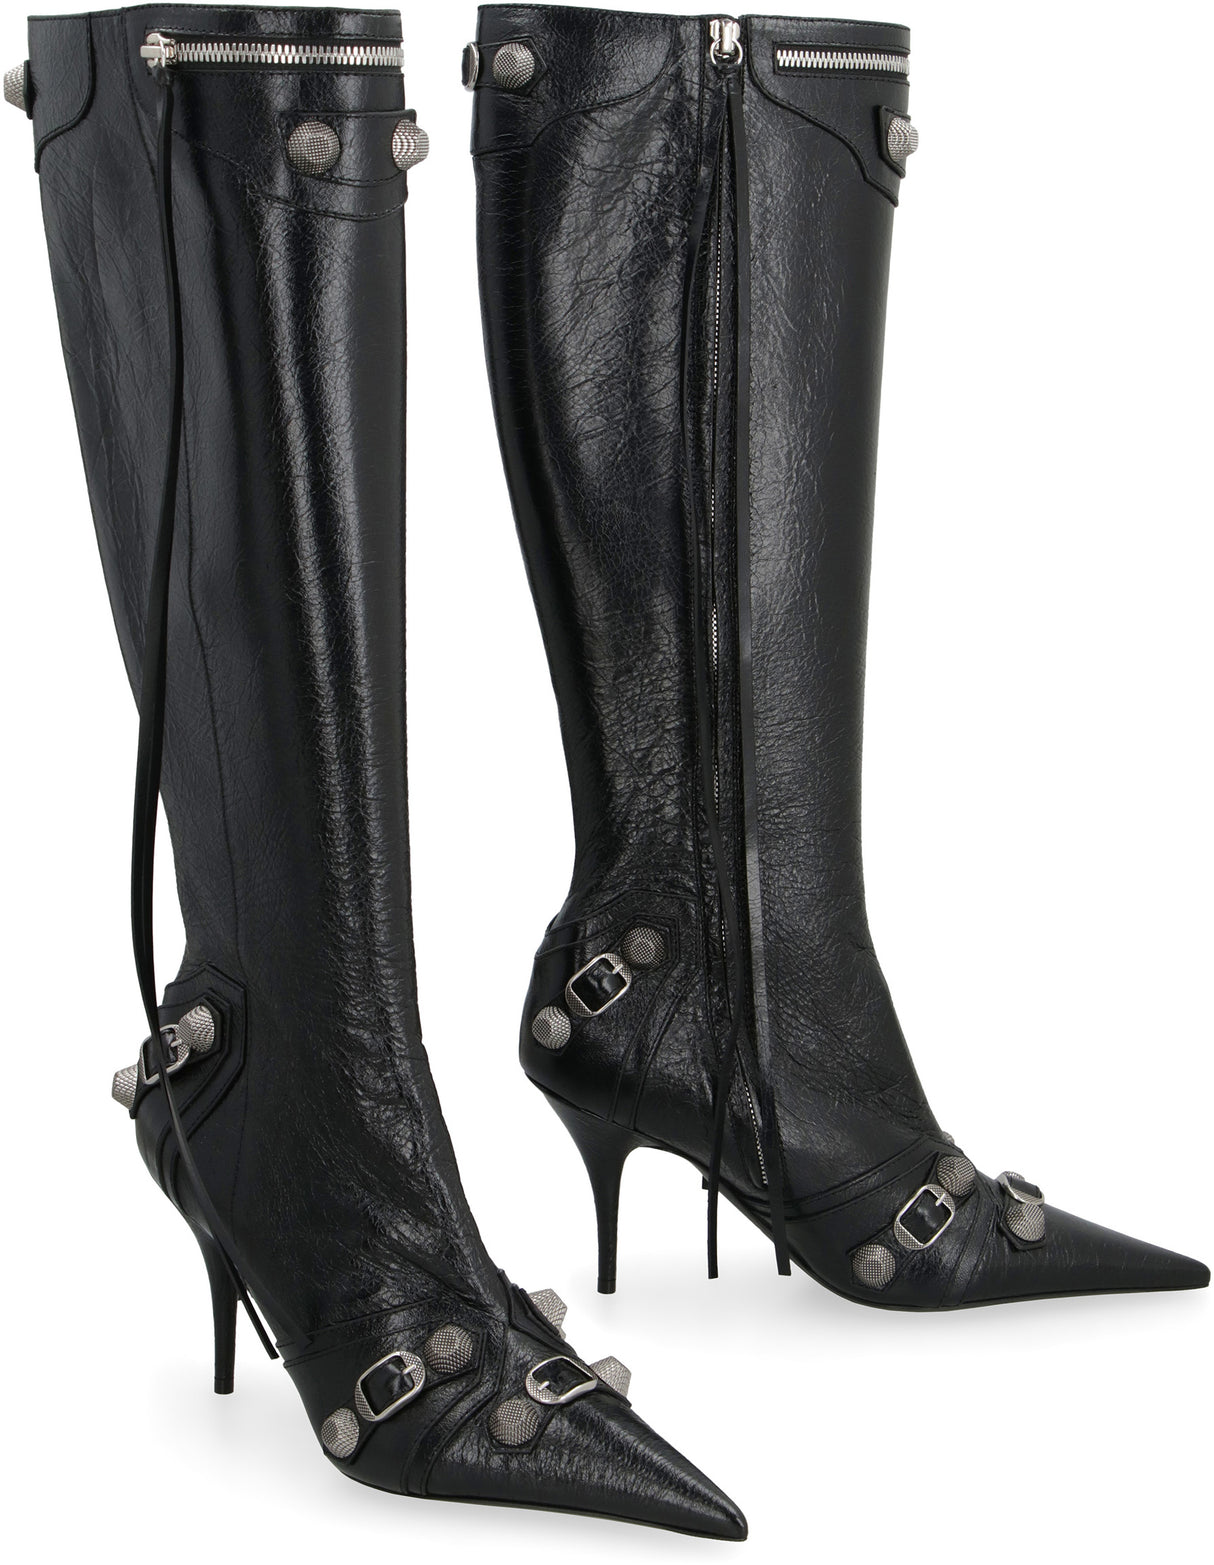 Studded Pointy-Toe Leather Boots with Side Zip by Balenciaga for Women